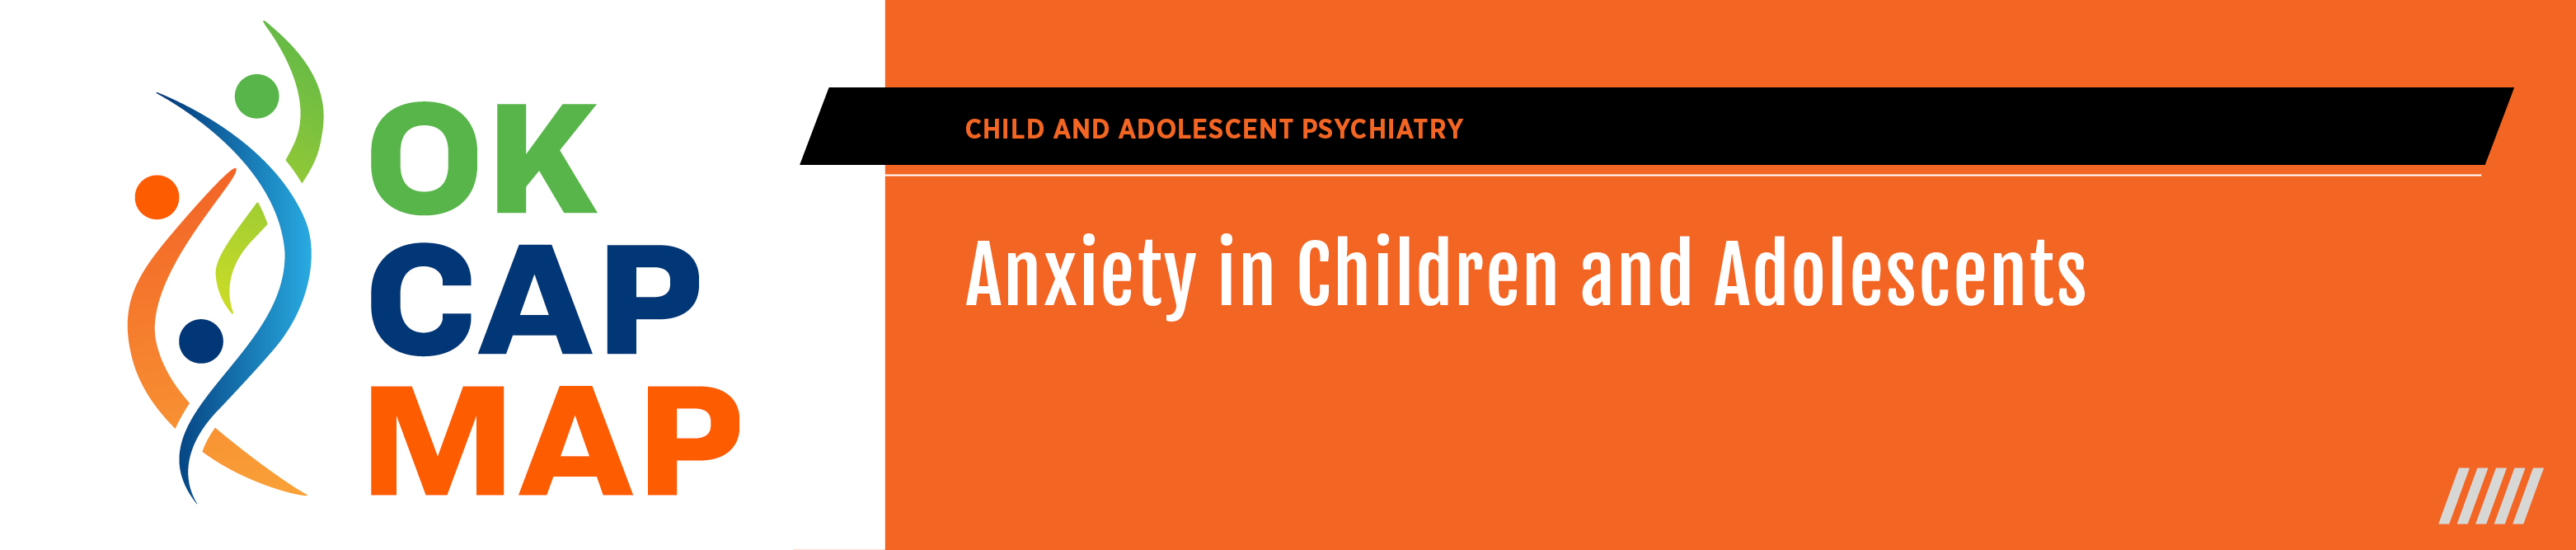 OKCAPMAP: Anxiety in Children and Adolescents Banner